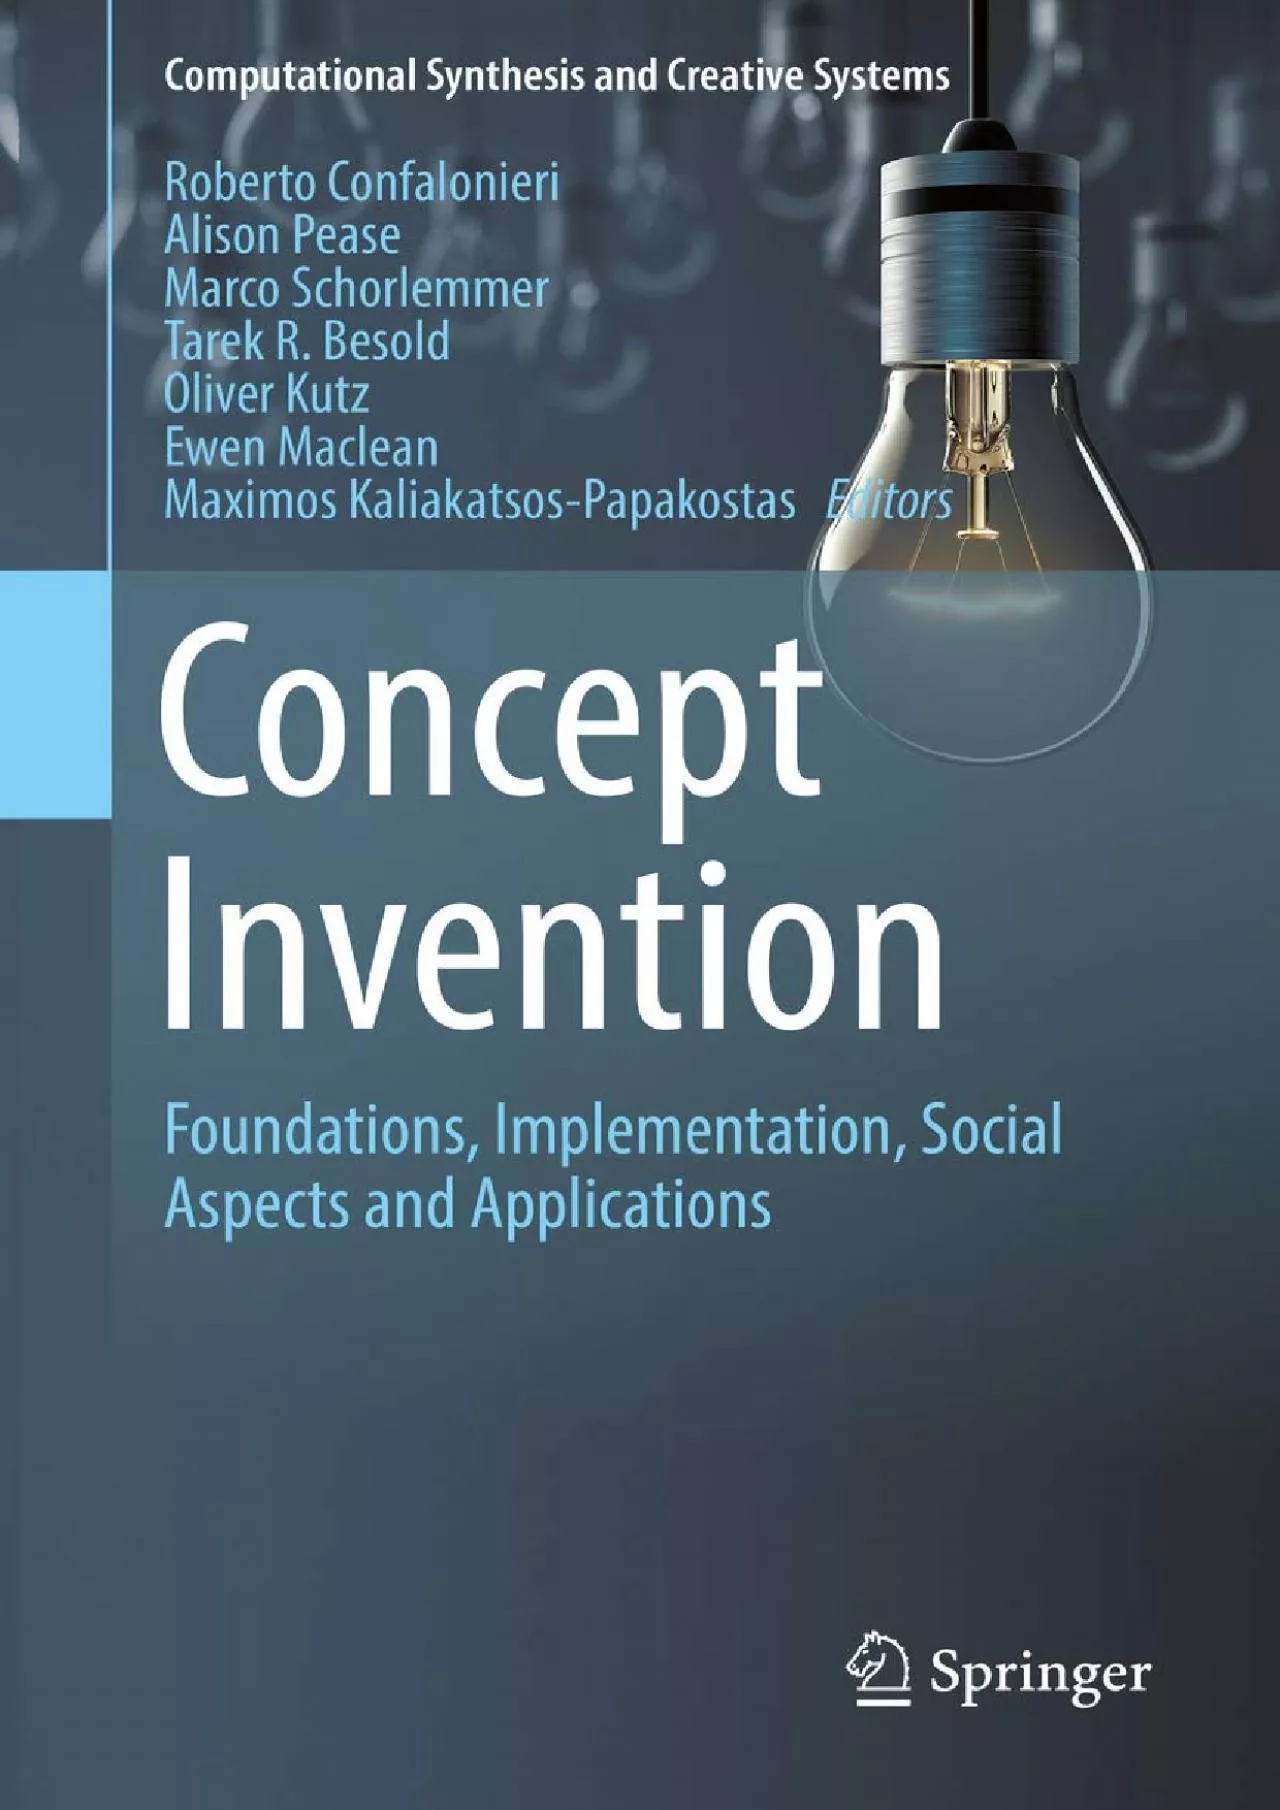 (BOOS)-Concept Invention Foundations Implementation Social Aspects and Applications (Computational